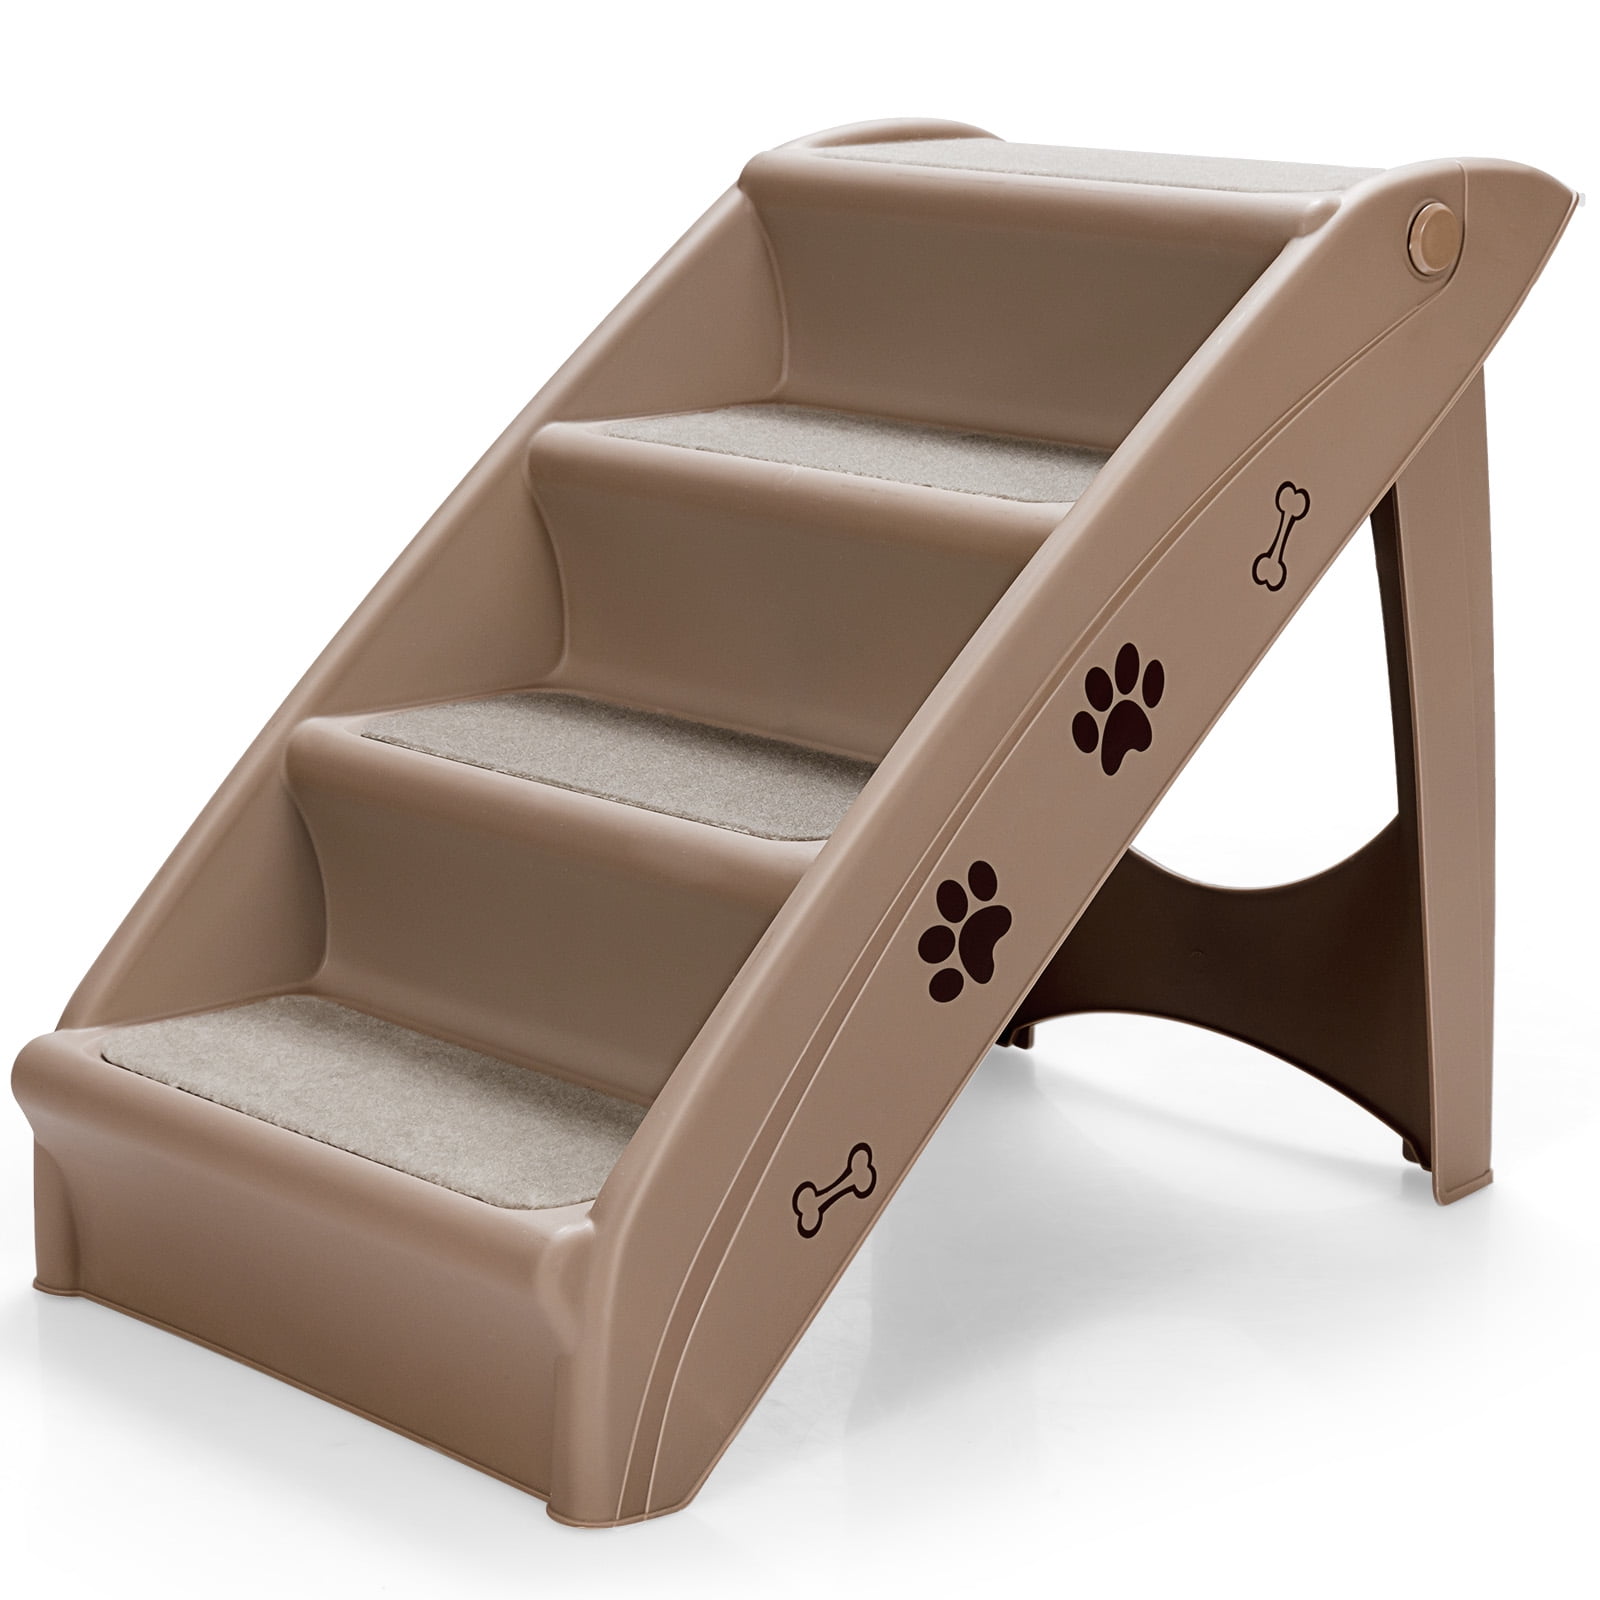 SOAR H-Pet/Cat/Dog Stairs Pet Stairs 5 Step Cat/Dog Stairs/Stairs Machine Washable Non-slip Bottom Size: 38 × 65 × 50cm Color : Brown